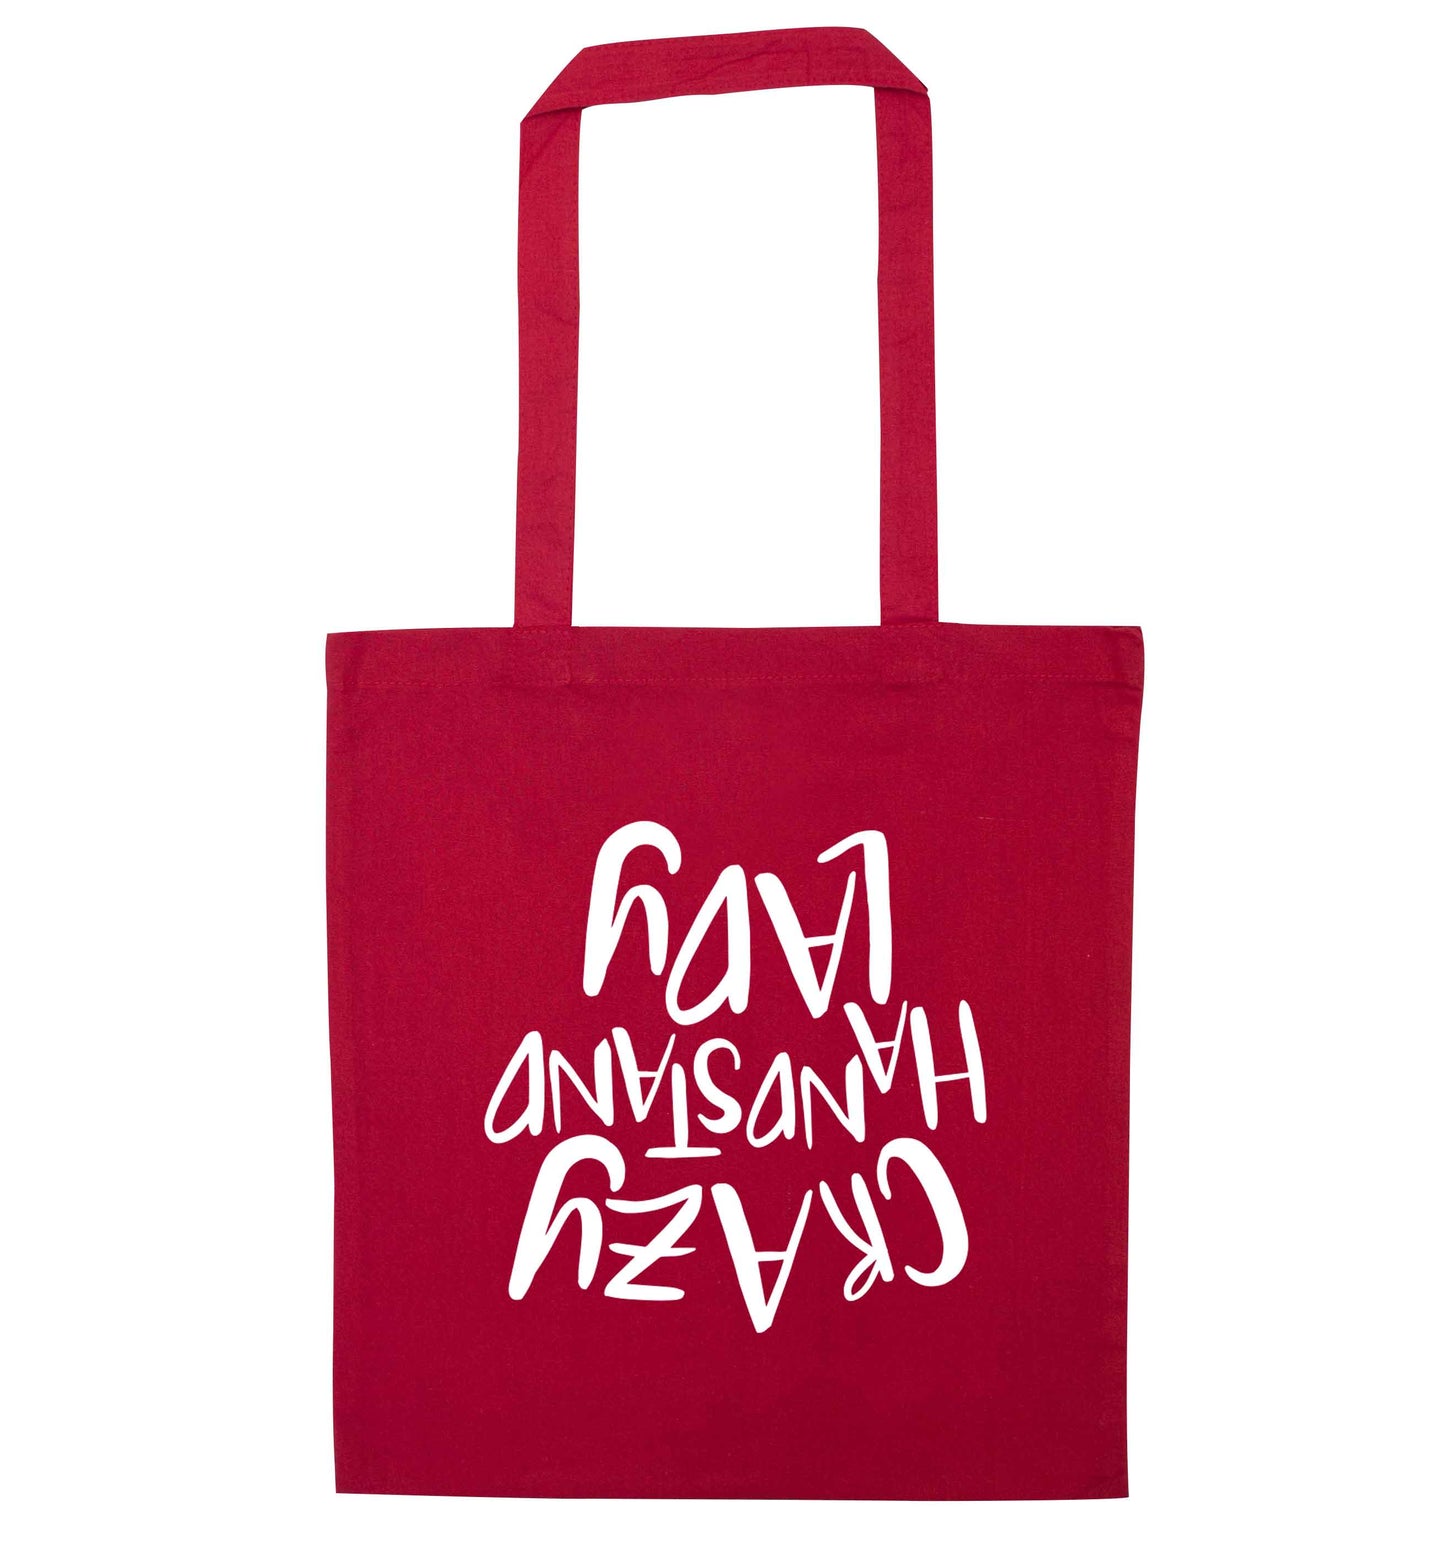 Crazy handstand lady red tote bag